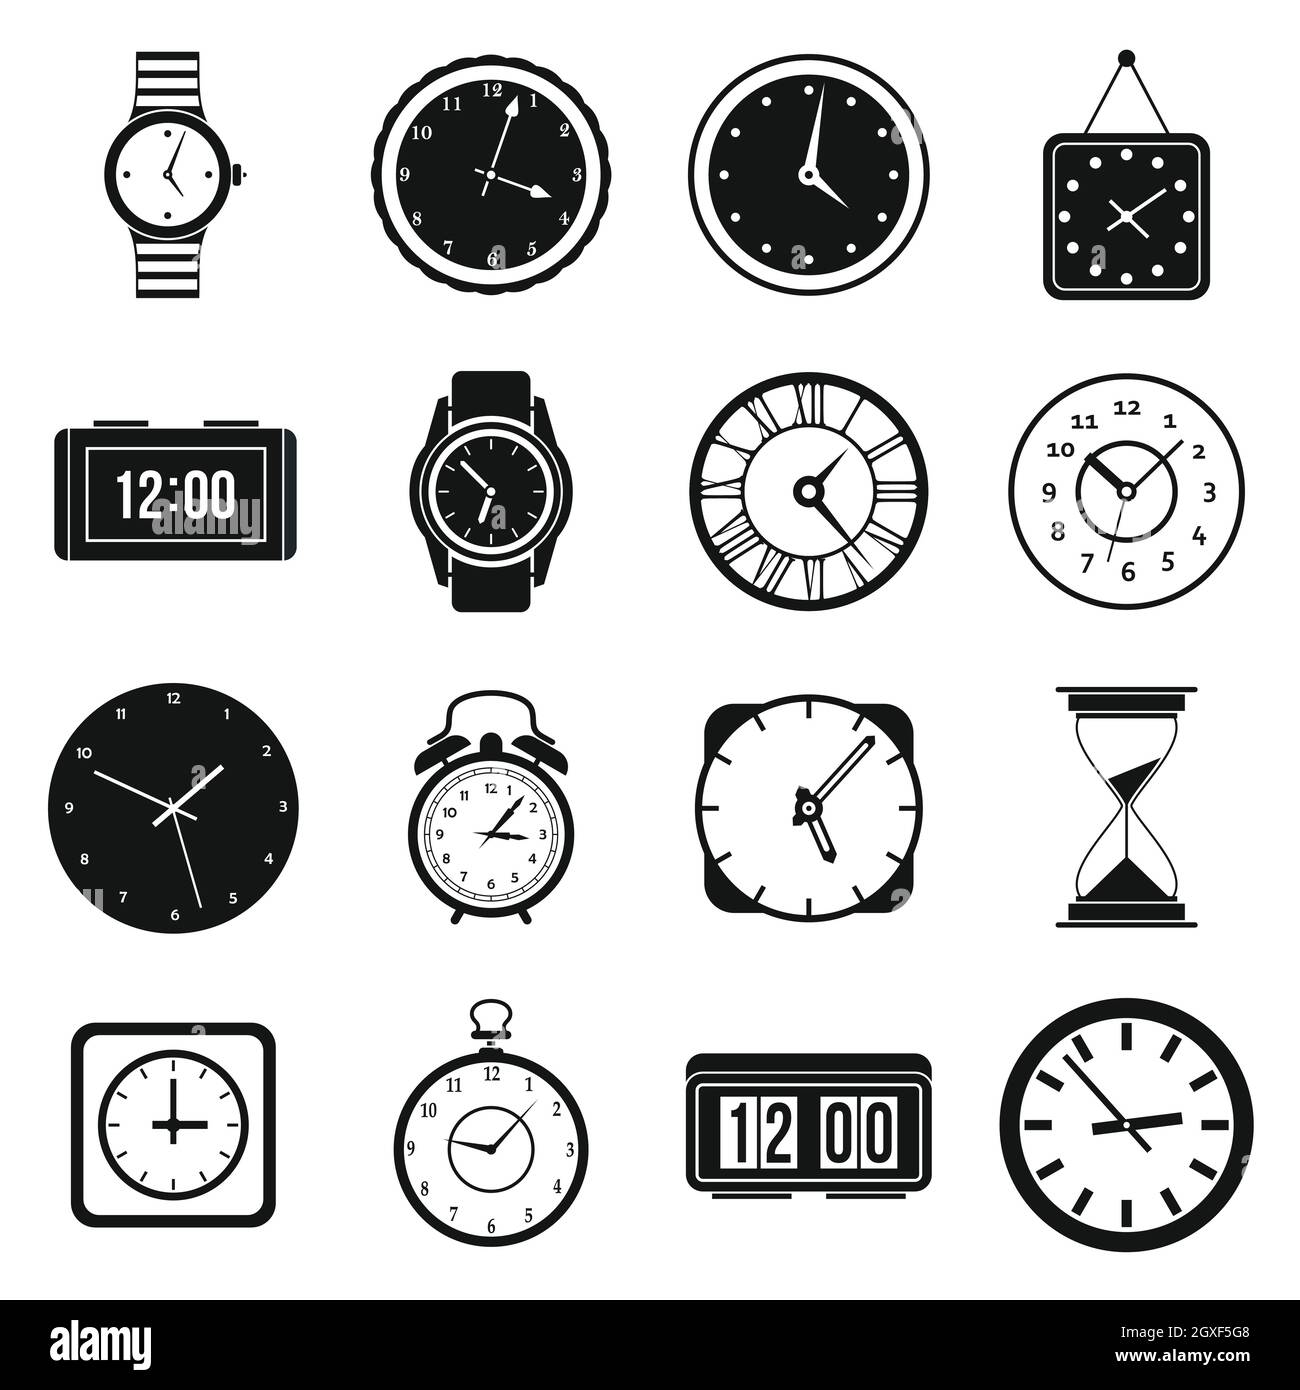 Time and Clock icons set in simple style for any design Stock Photo